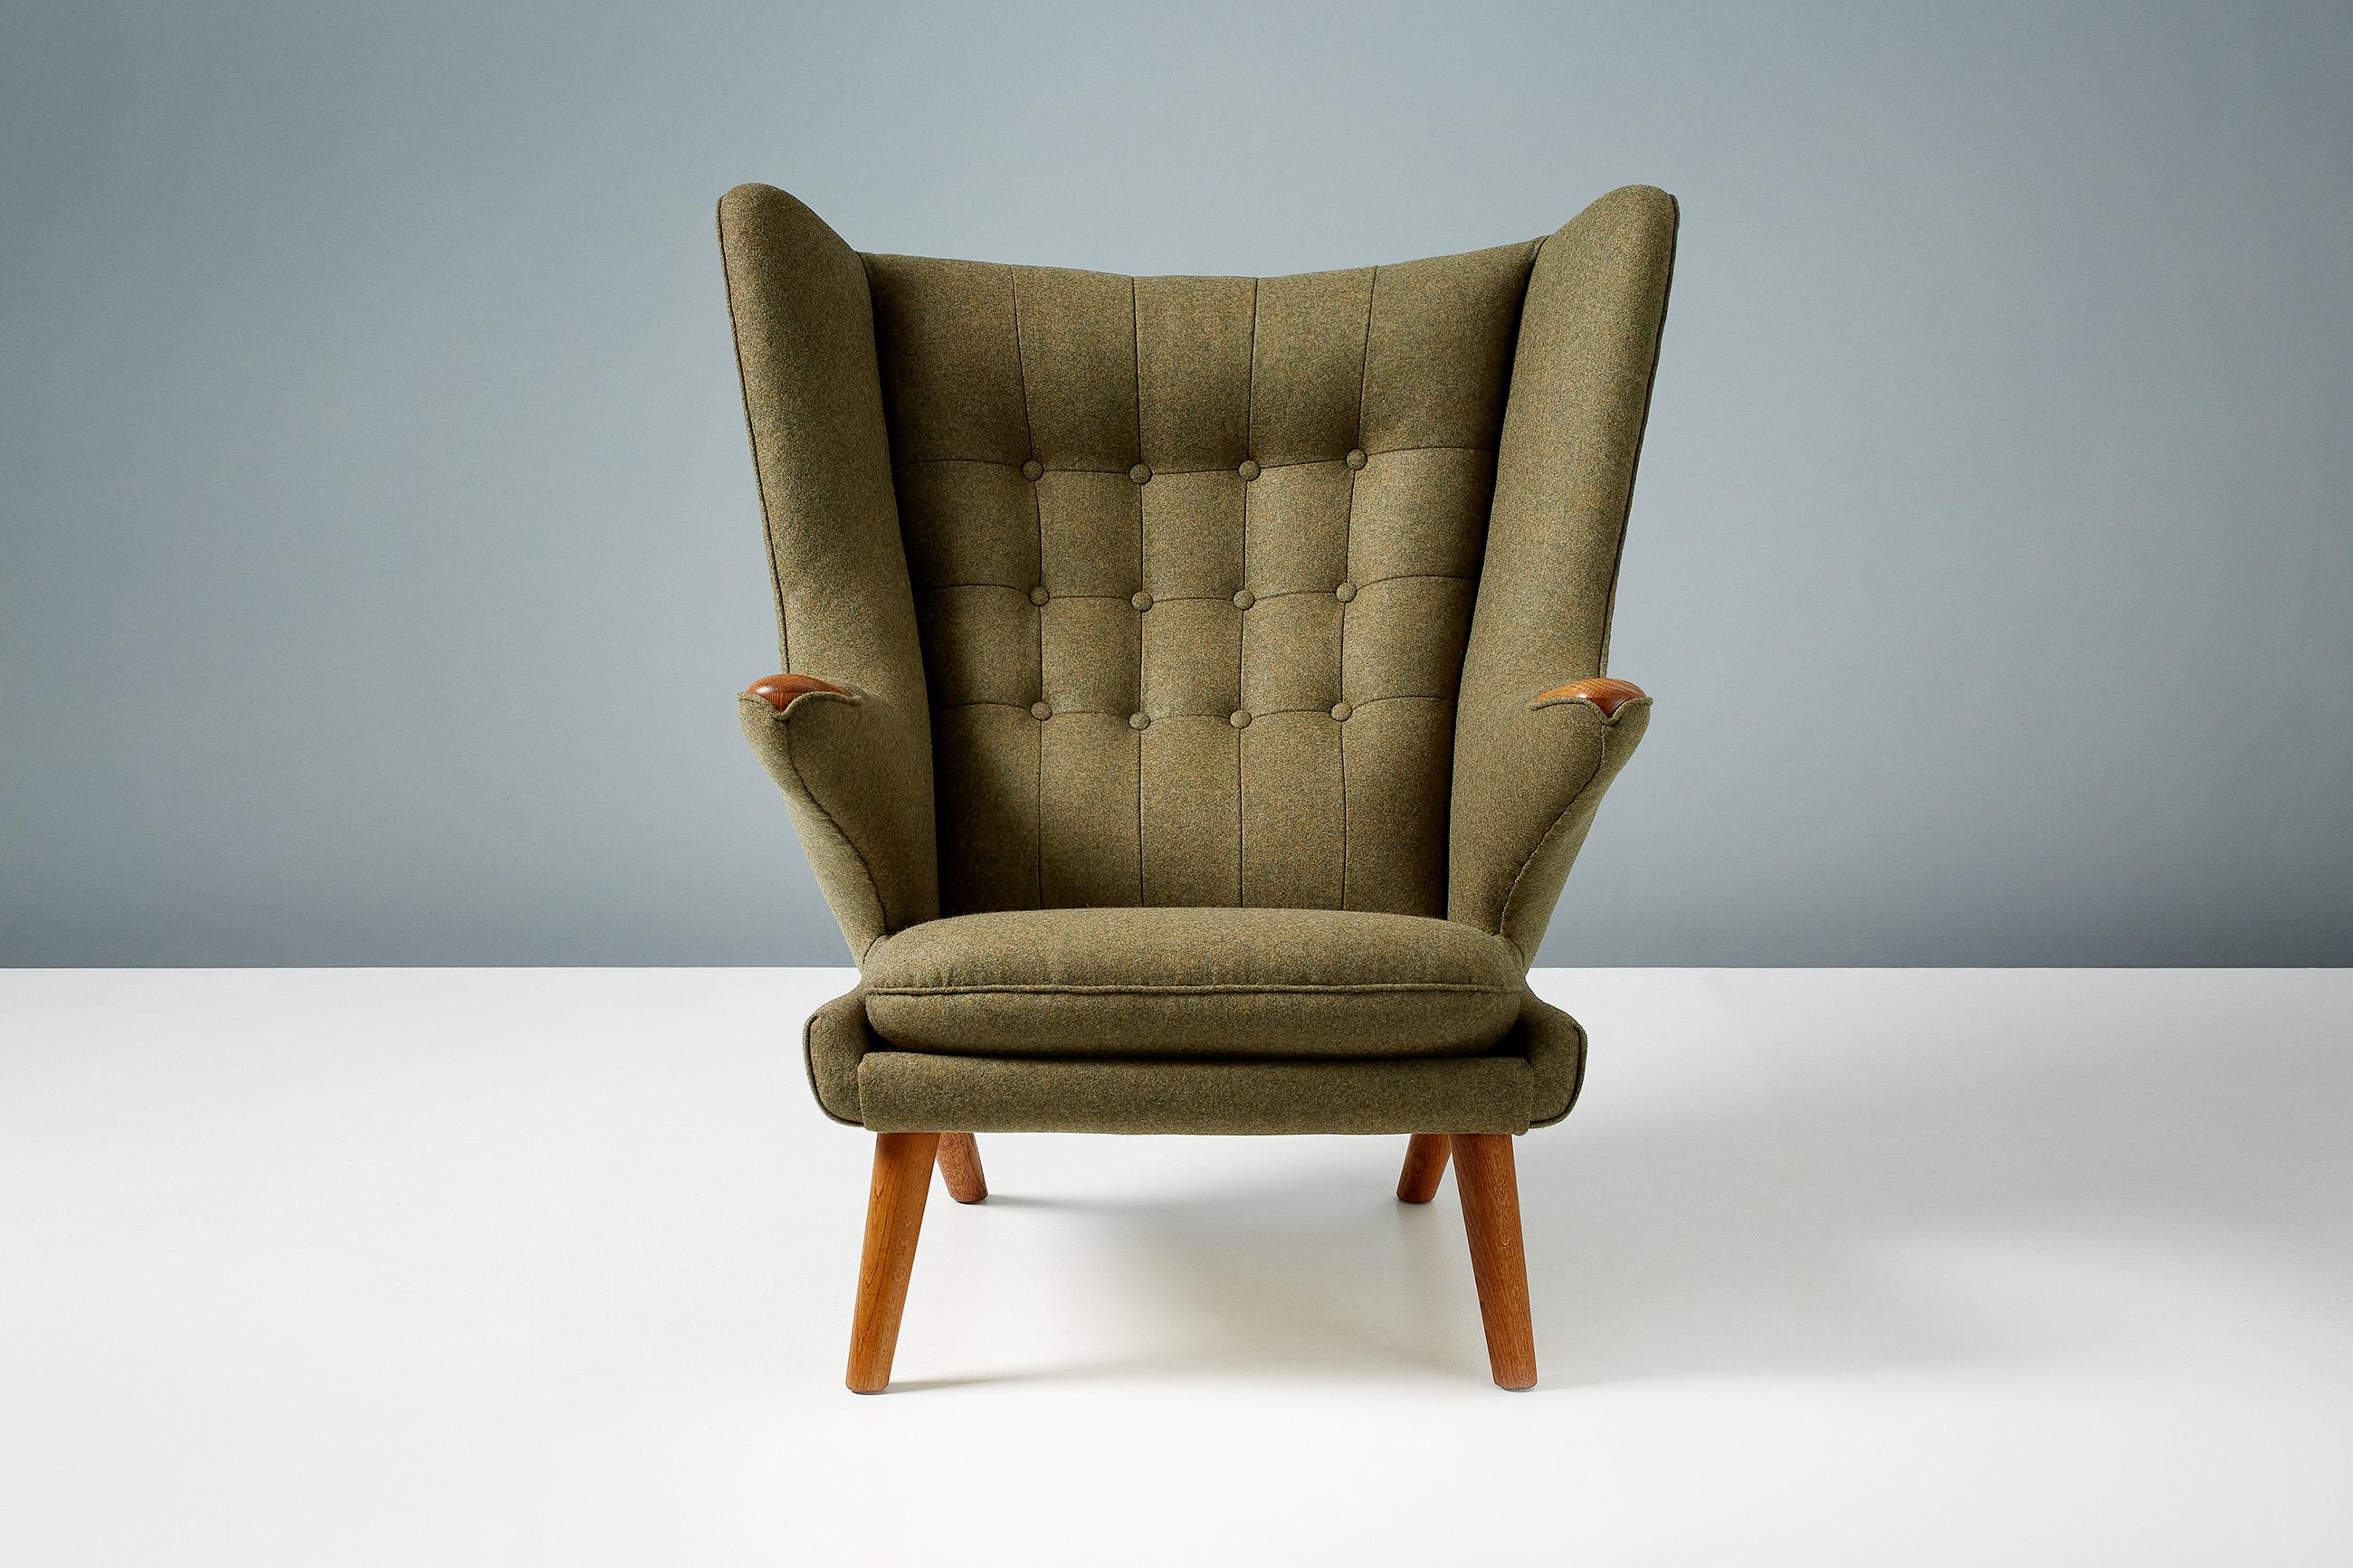 Hans J. Wegner Wingback Chairs - 9 For Sale at 1stDibs | wegner ch445 wing  chair, wegner wing chair pris, wing chair ch445